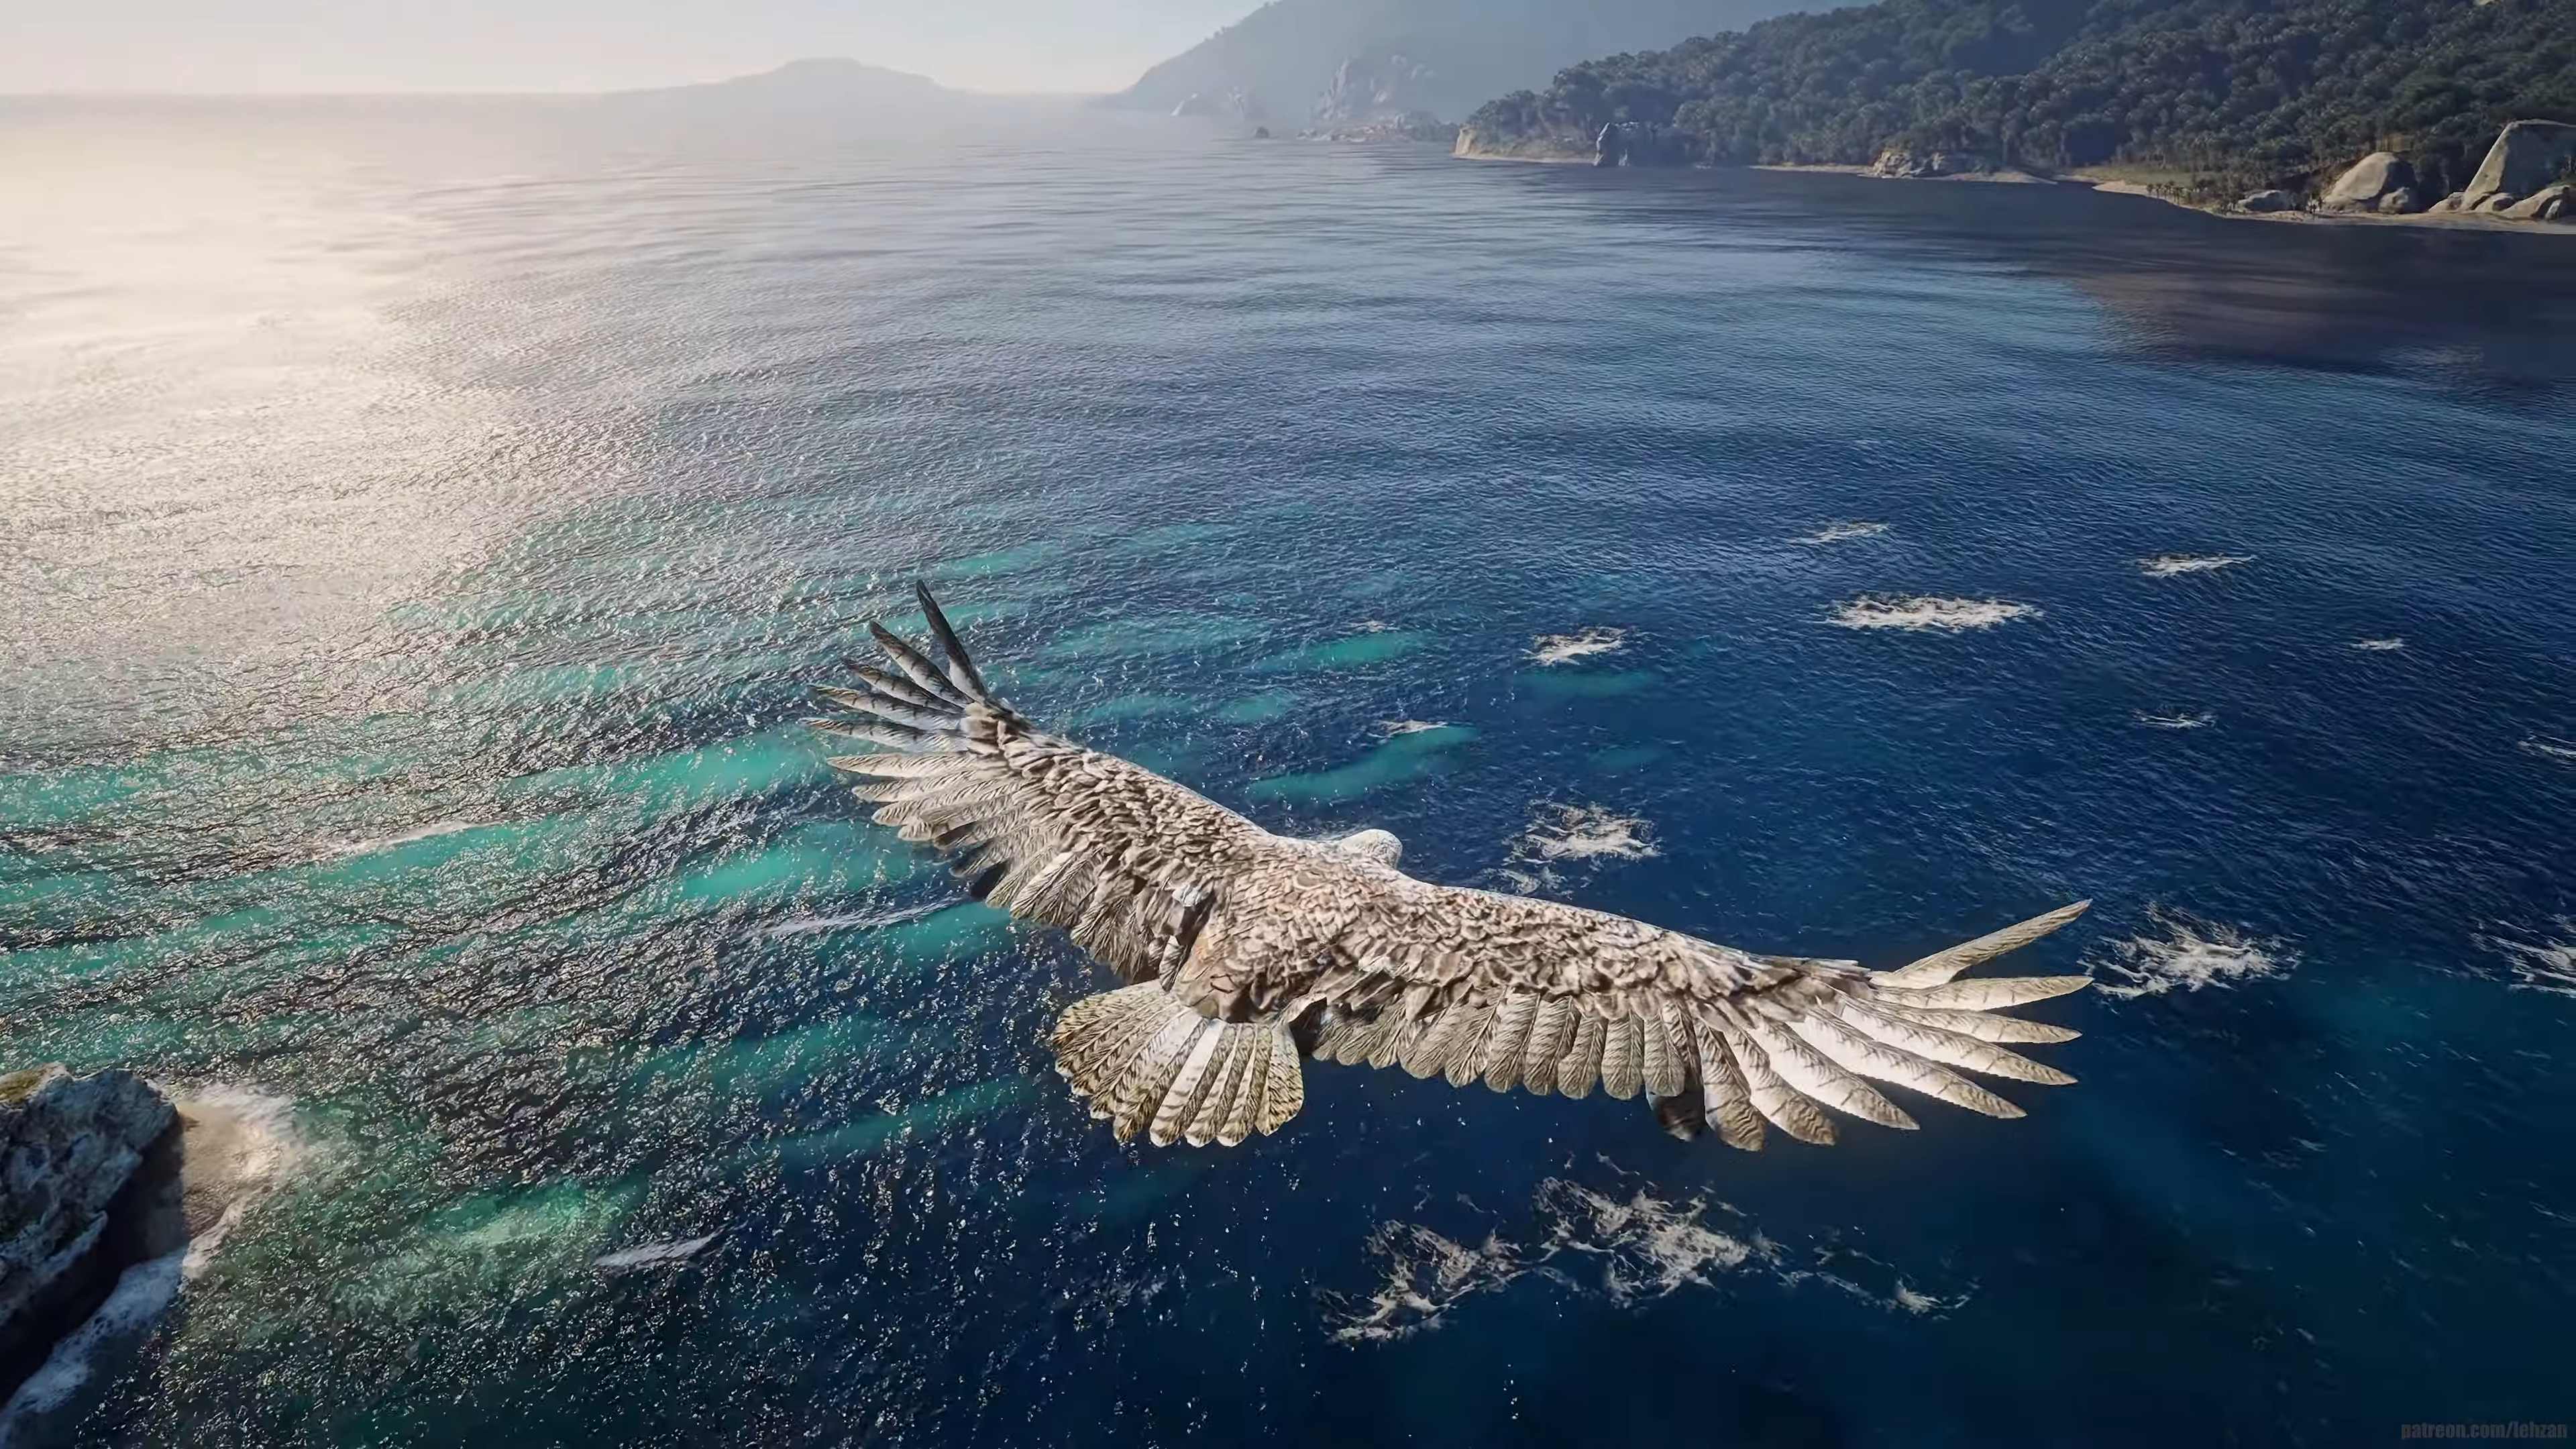 Majestic eagle soaring above a vast sea in a cinematic shot reminiscent of Red Dead Redemption 2, perfect HD wallpaper for gaming enthusiasts.